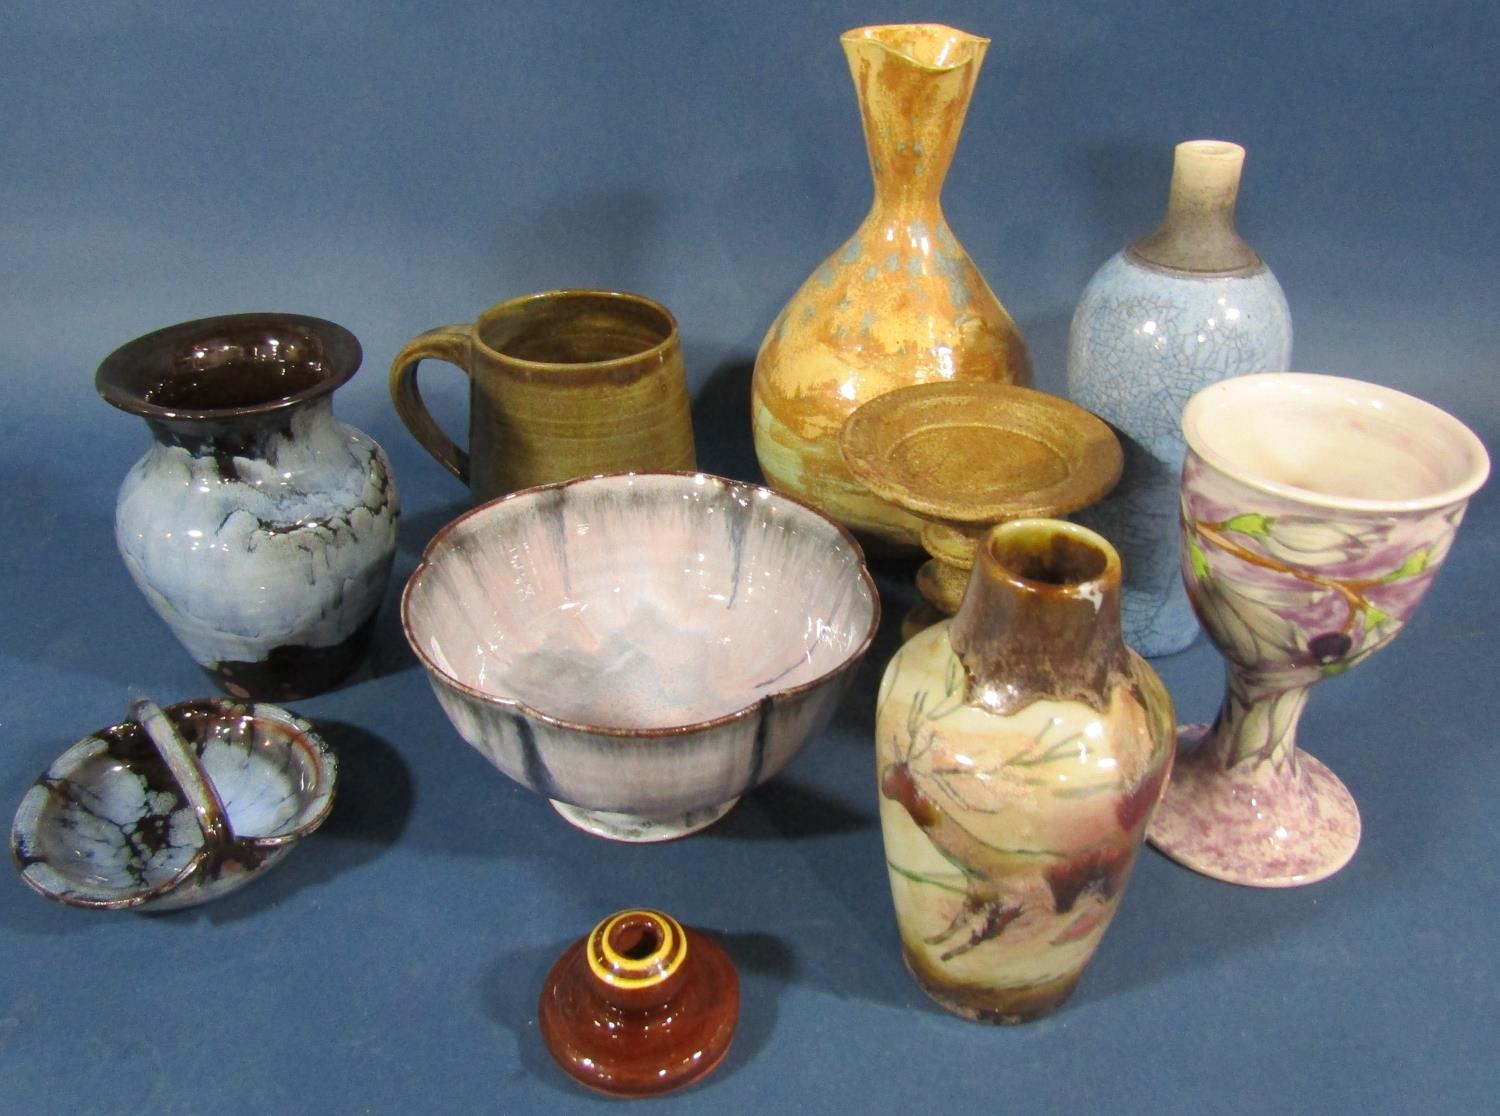 Collection of studio pottery vases and bowls with blue and brown glaze to include vase with